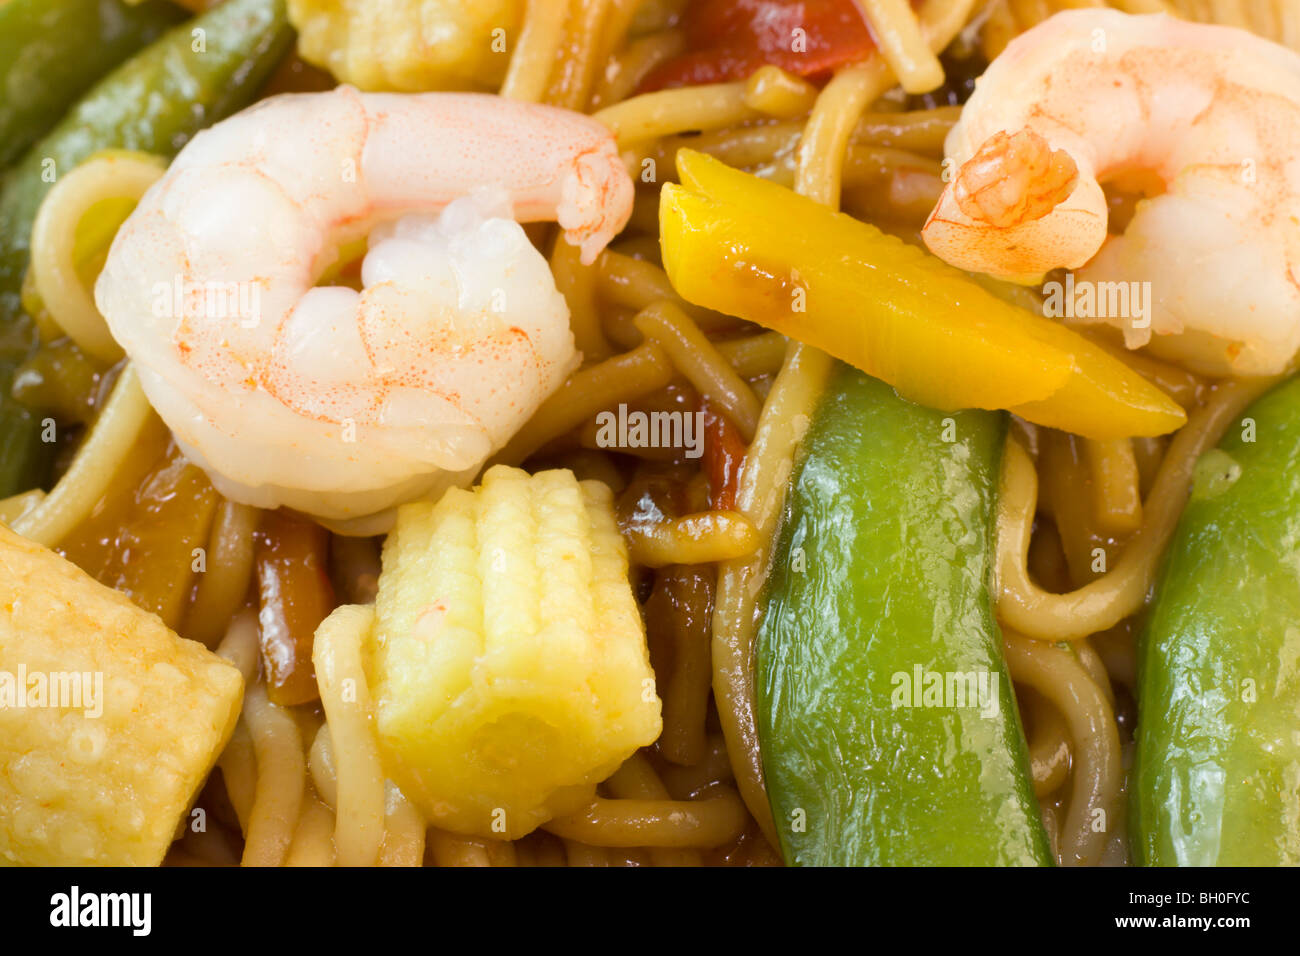 macro view of shrimp stir fry noodles with snap peas, and baby corn Stock Photo